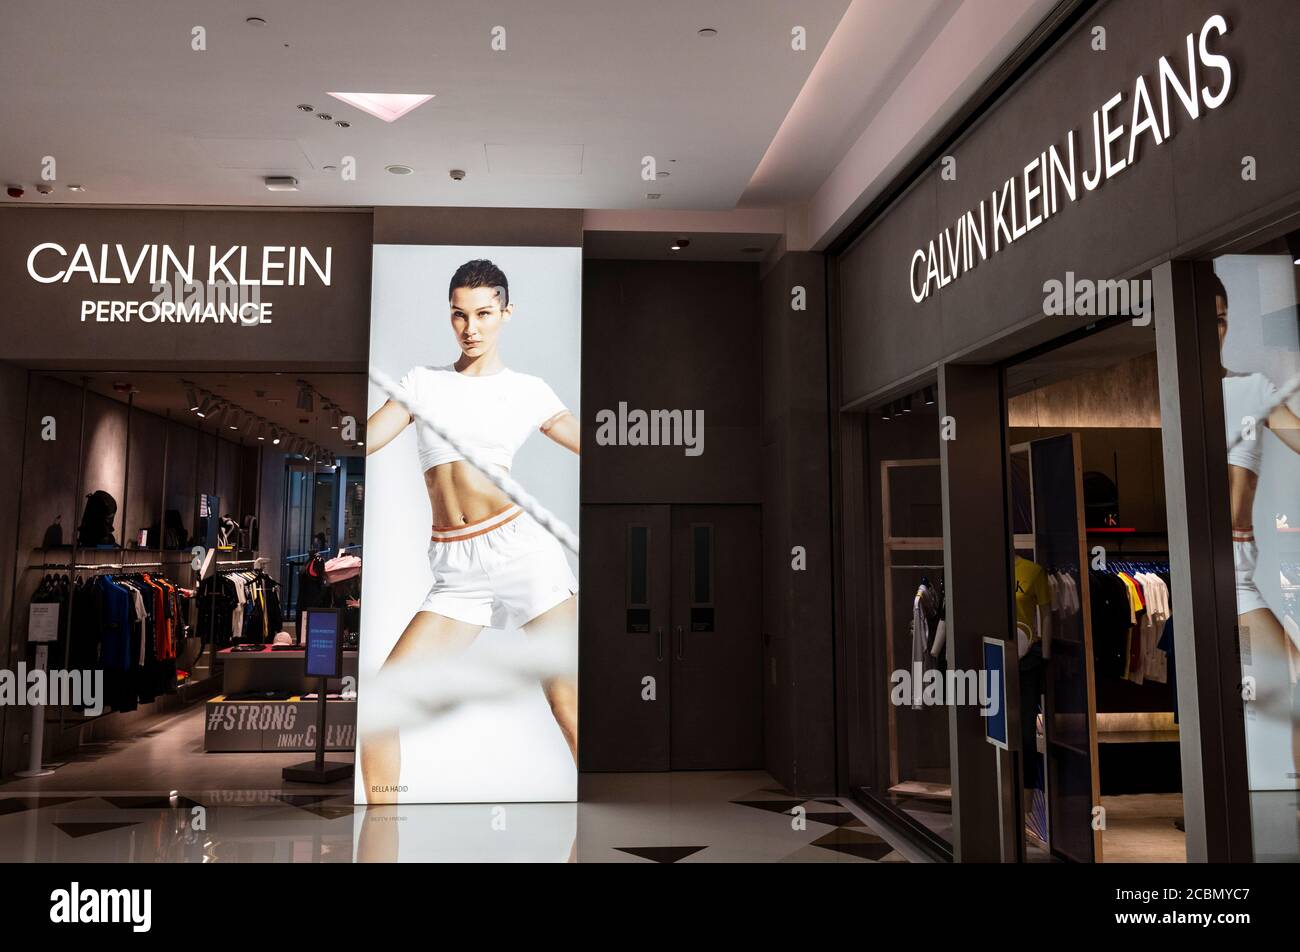 American multinational fashion brand Calvin Klein Jeans store in Hong Kong  Stock Photo - Alamy